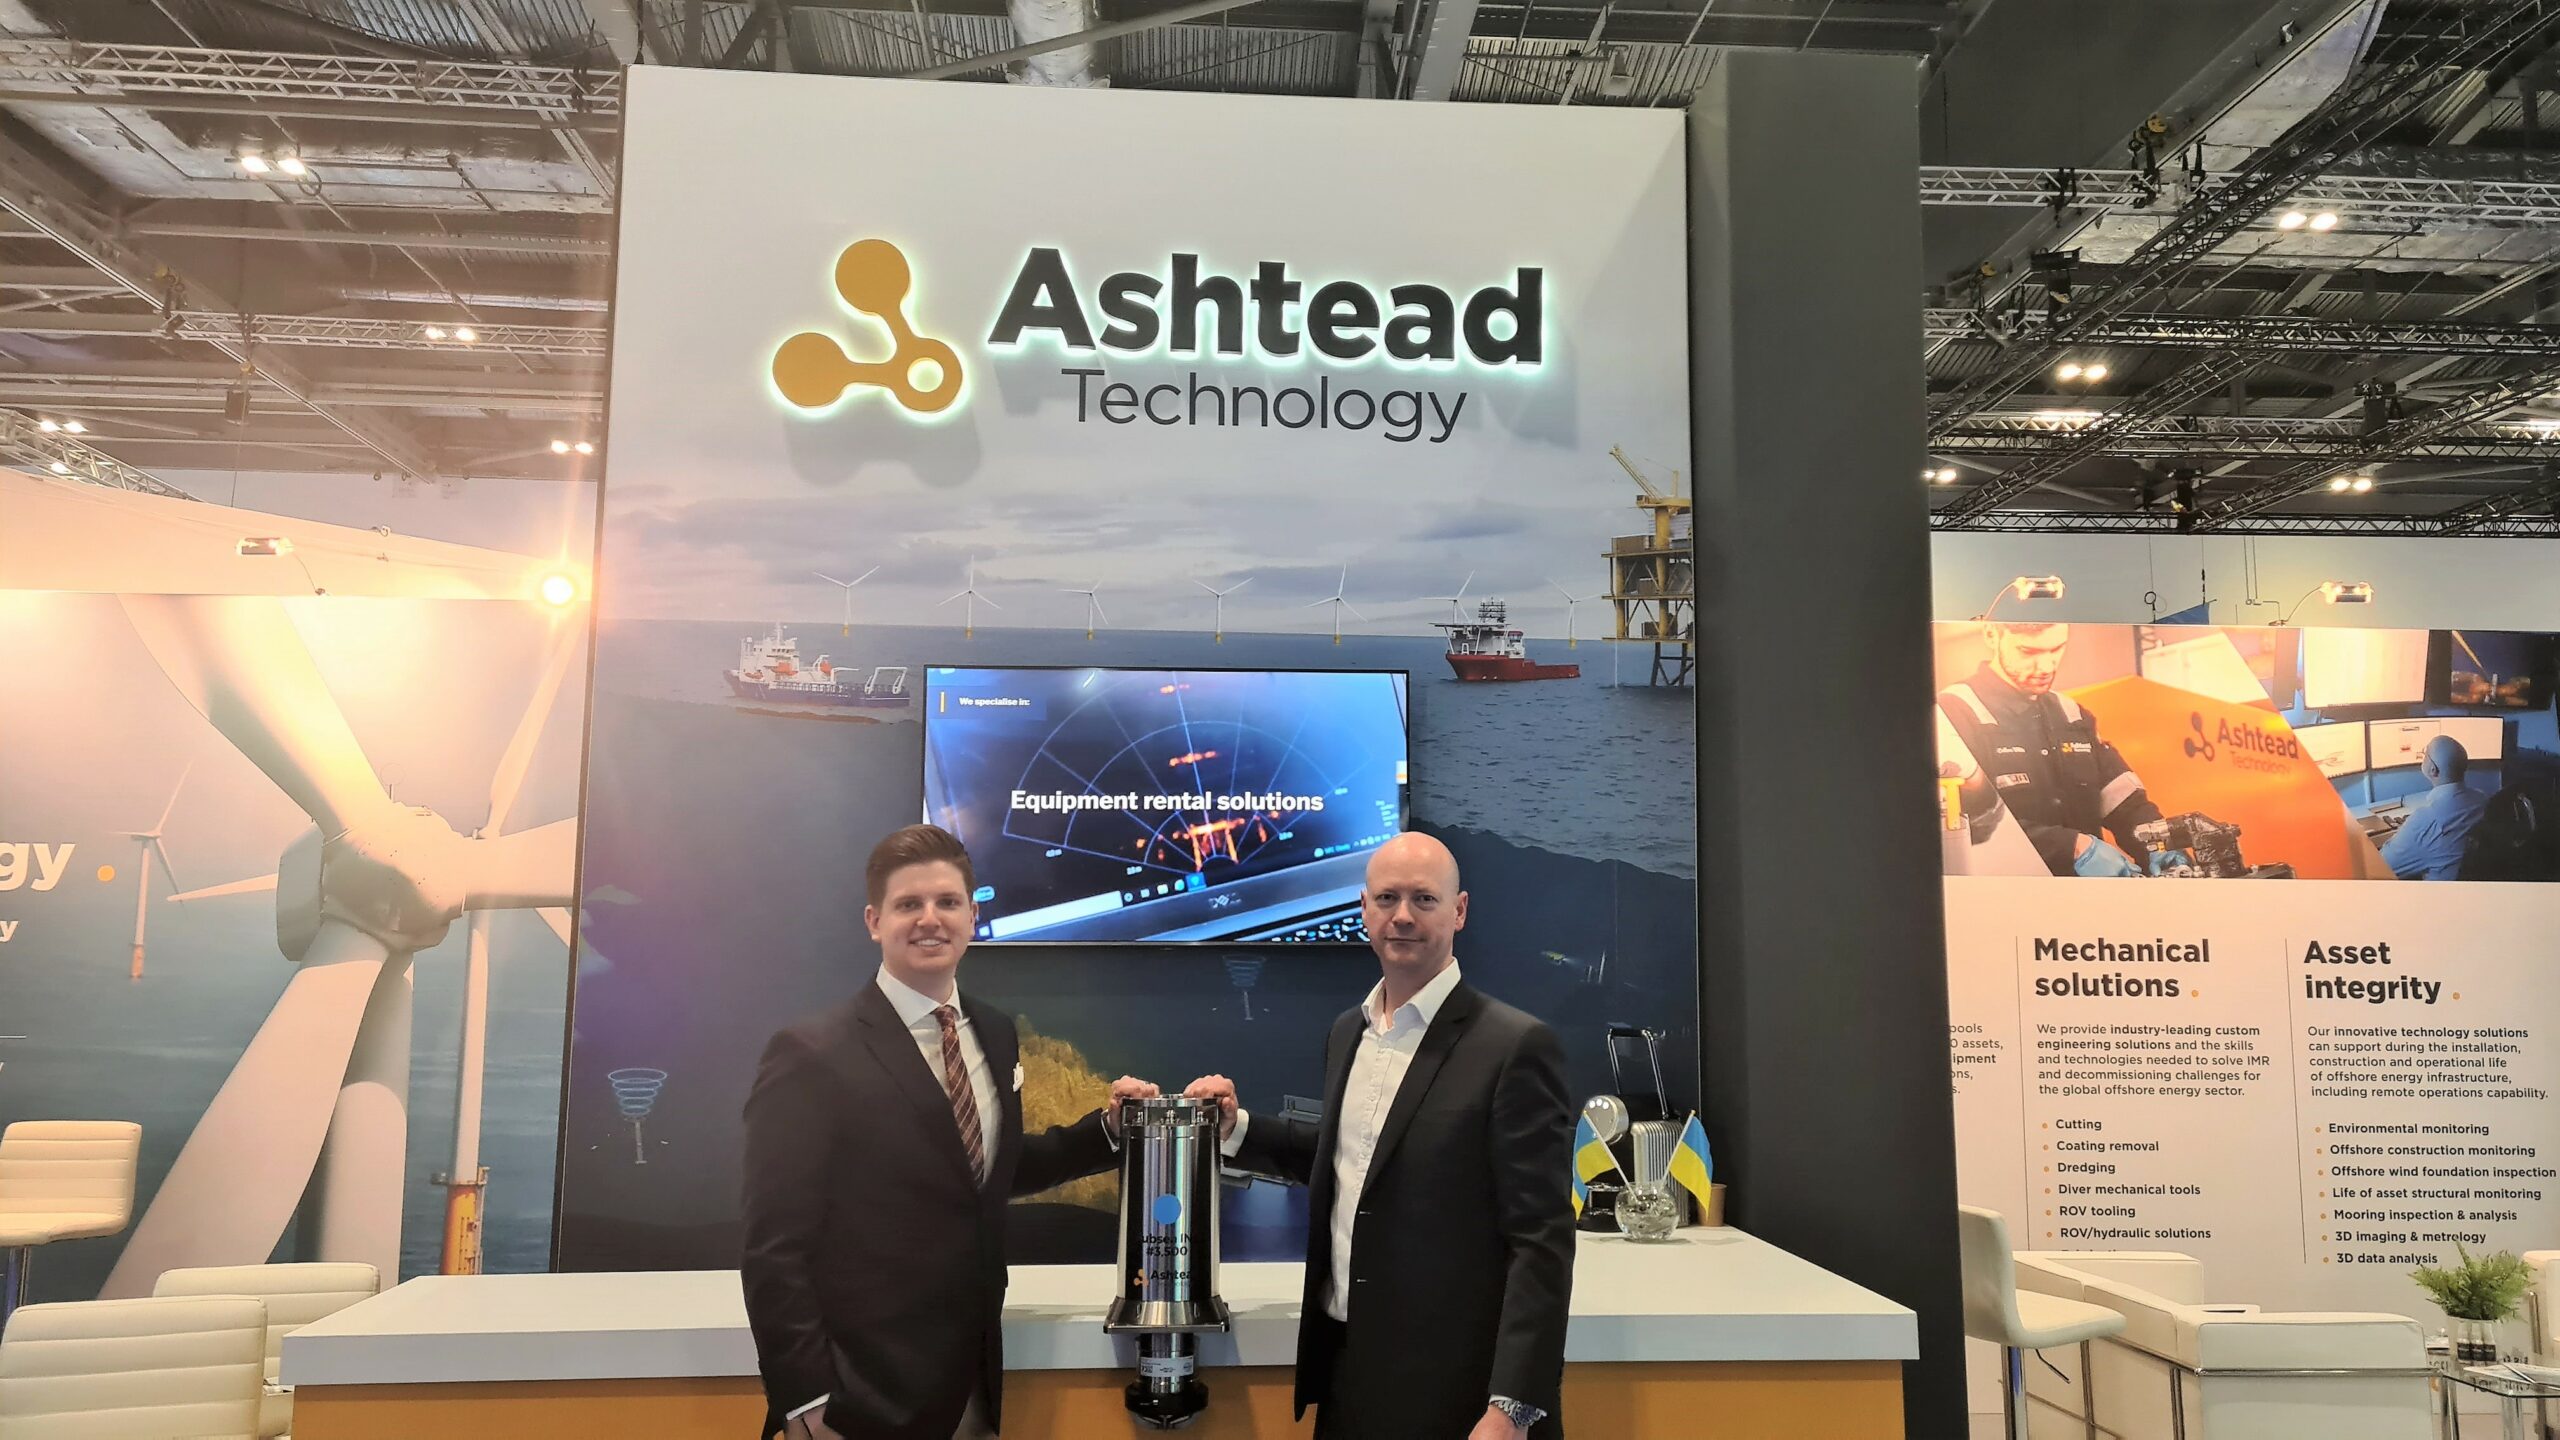 MEMBER NEWS: Ashtead Technology strengthens its rental fleet with investment in iXblue technologies